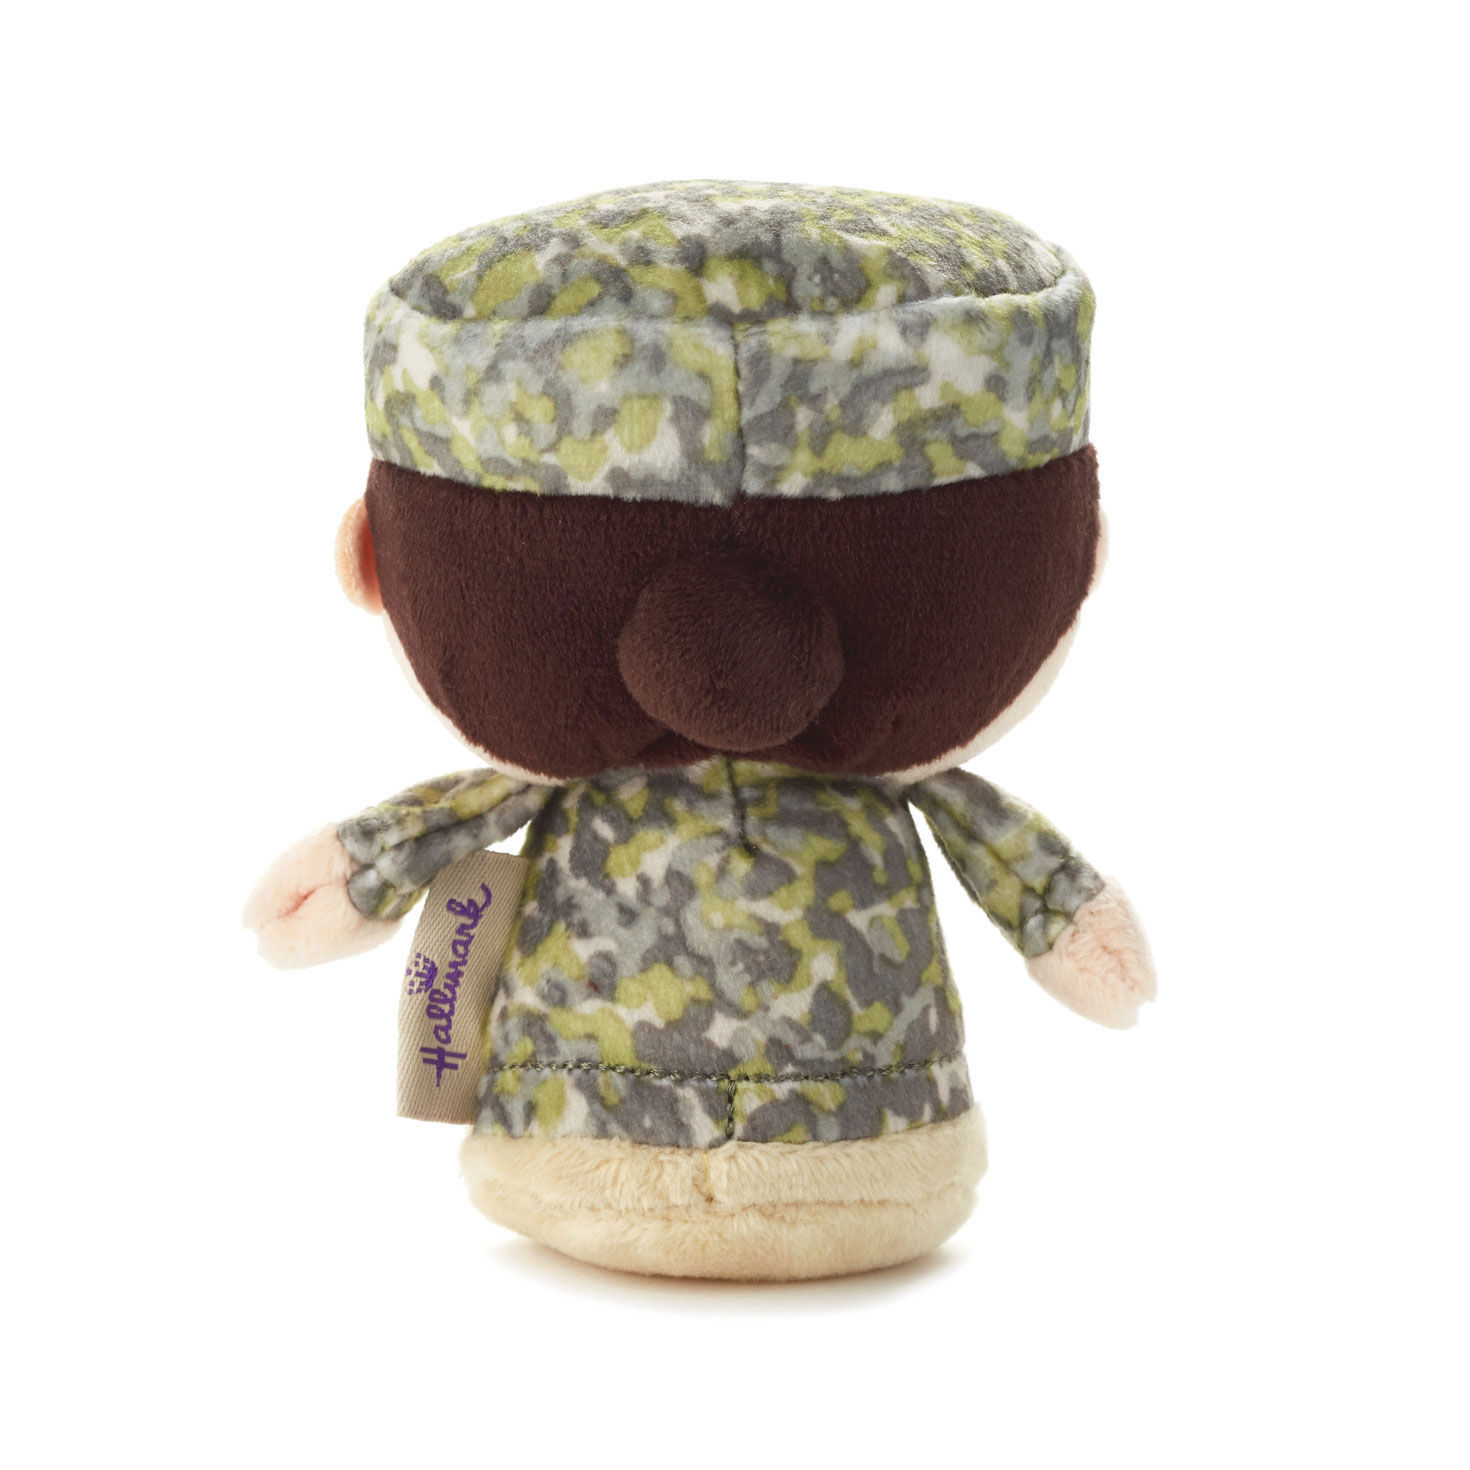 itty bittys® White Woman in Green Camo Plush for only USD 9.99 | Hallmark